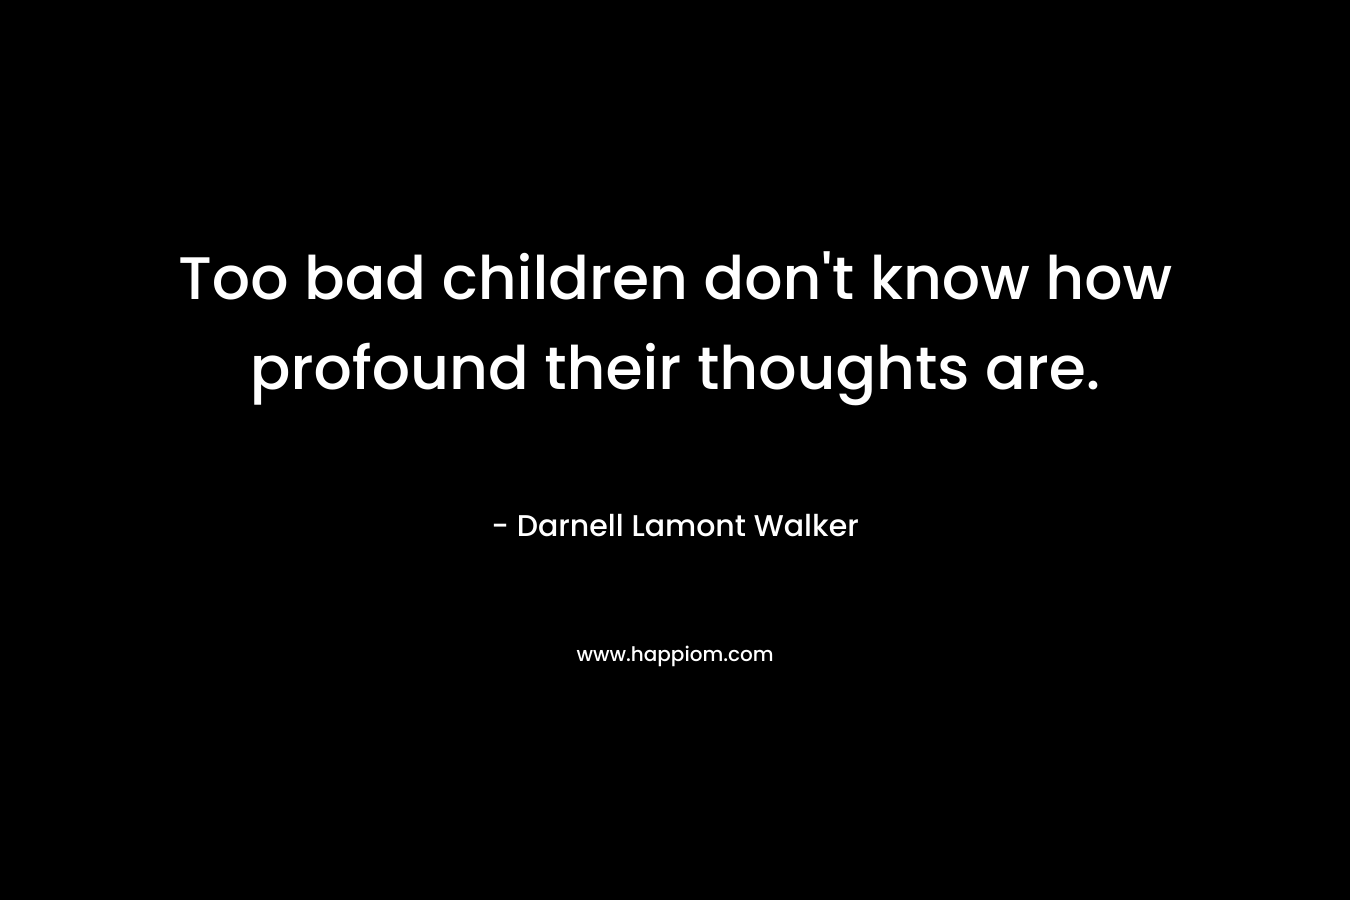 Too bad children don't know how profound their thoughts are.